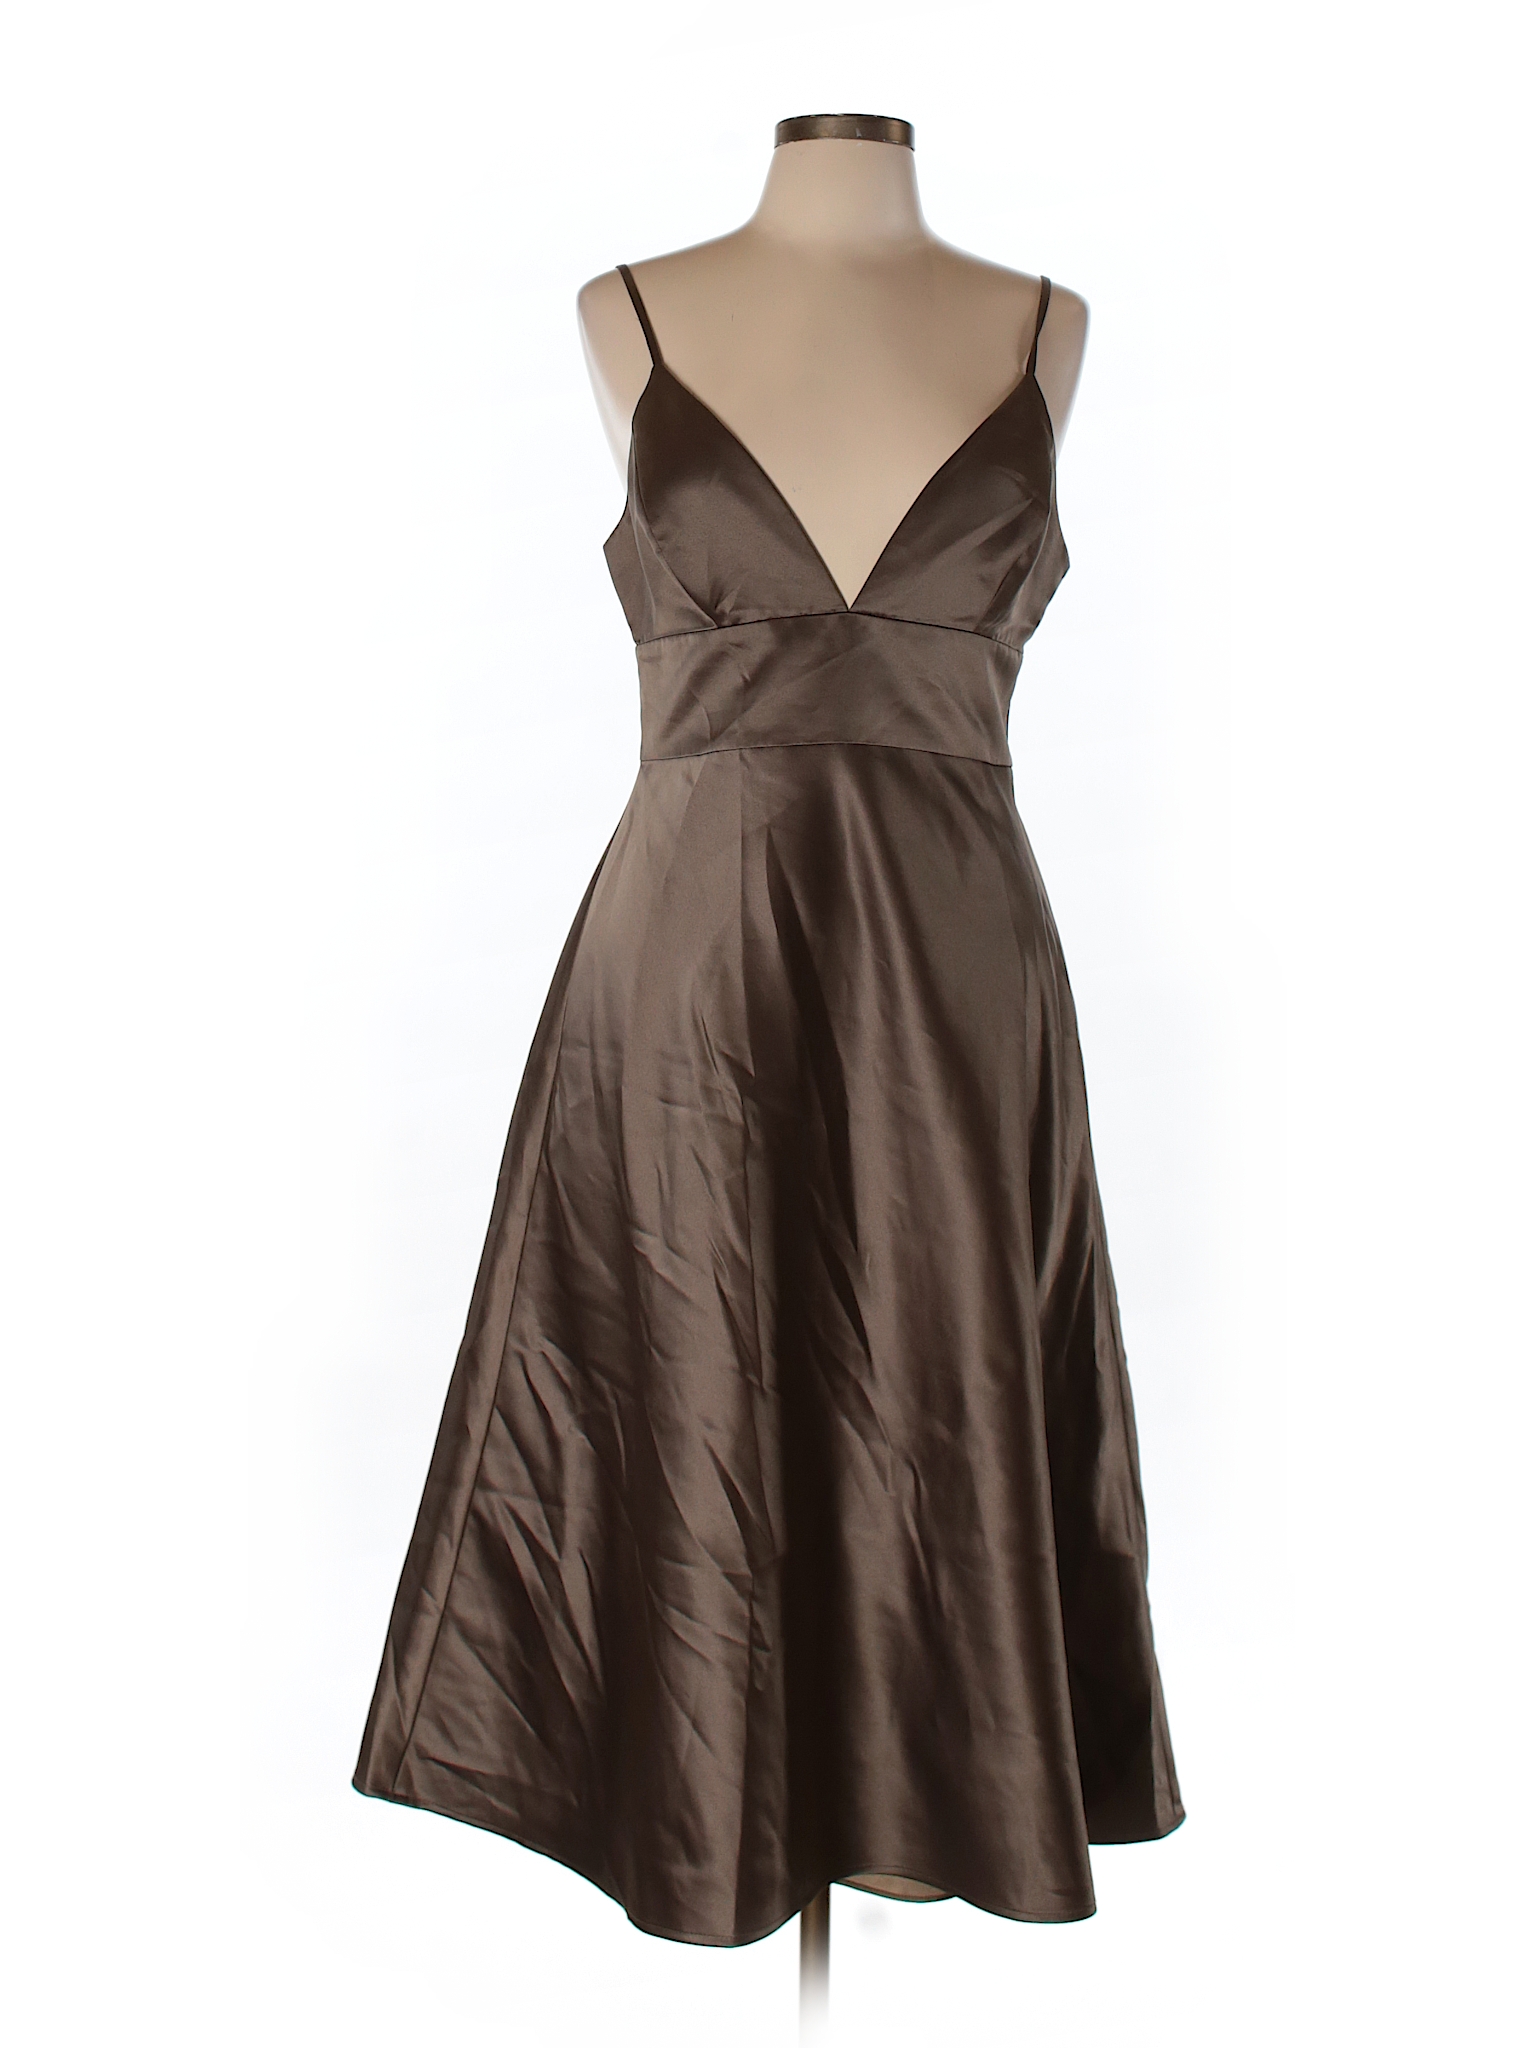 Max and Cleo 100% Polyester Solid Brown Cocktail Dress Size 10 - 79% ...